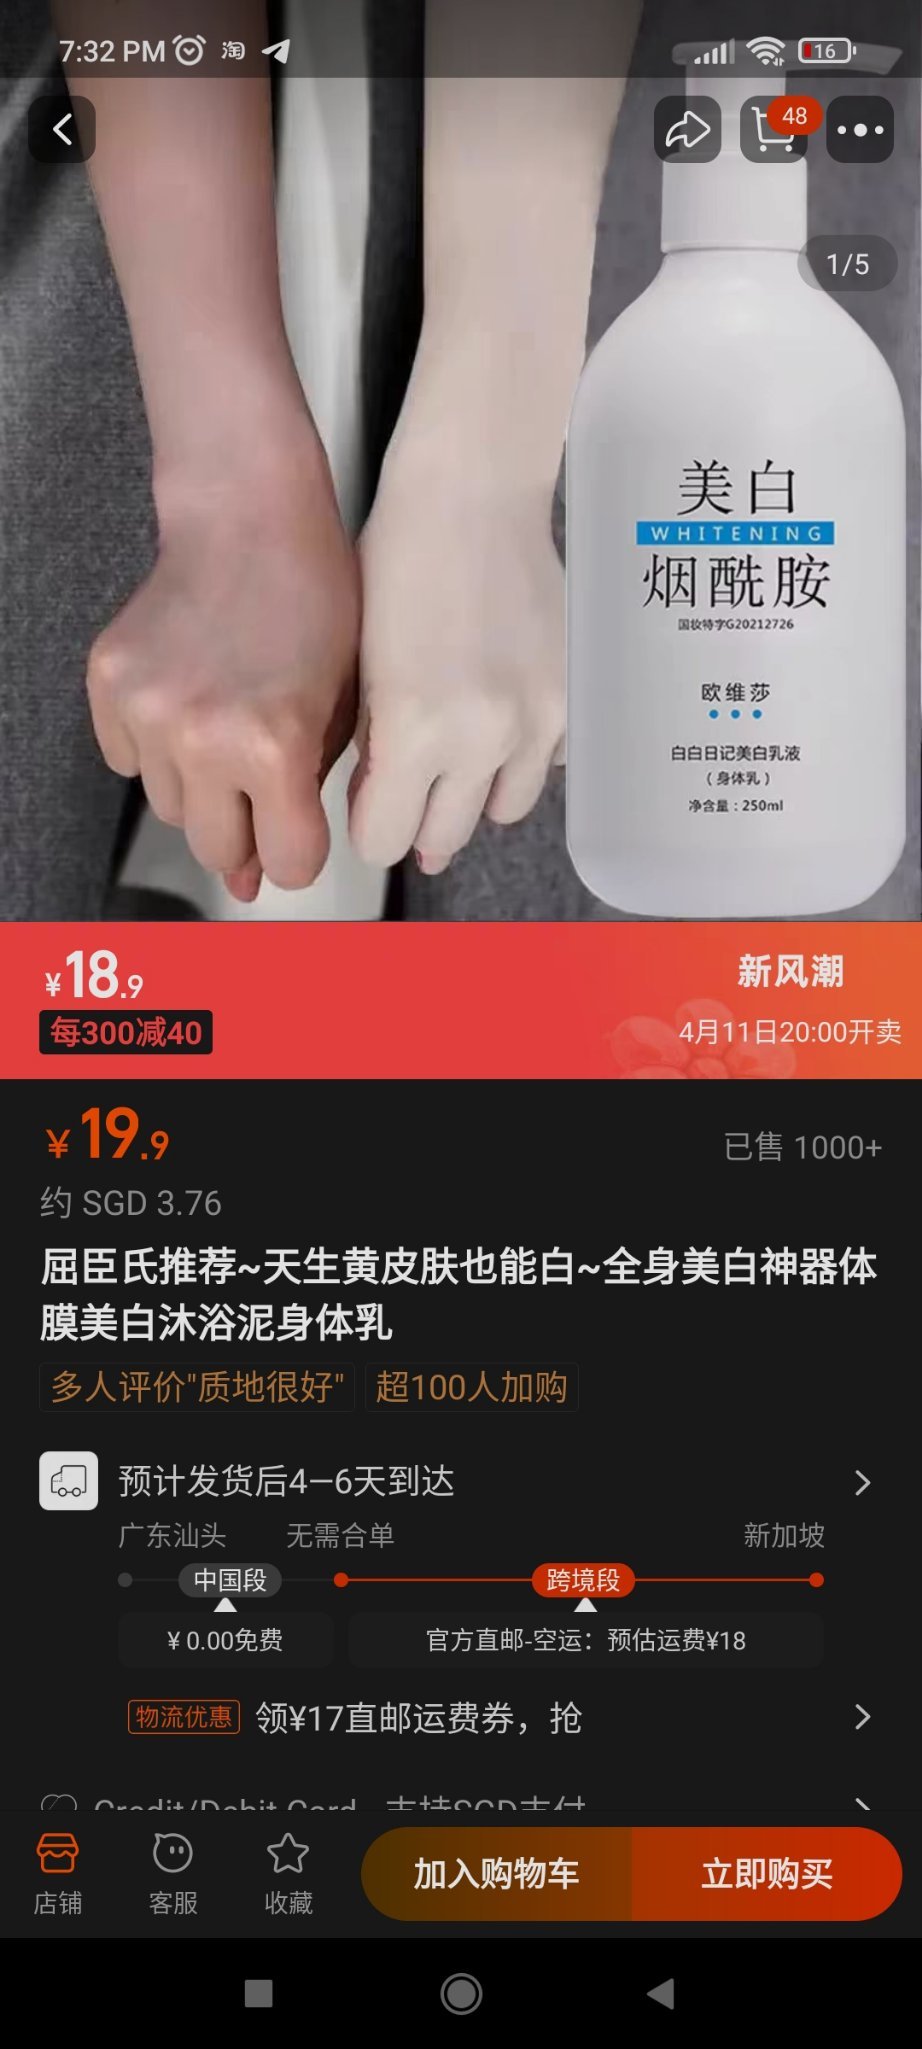 $Alibaba (BABA.US)$ Let me ask if anyone has bought this product, is it really going to be very “white”? Please see the right hand above.